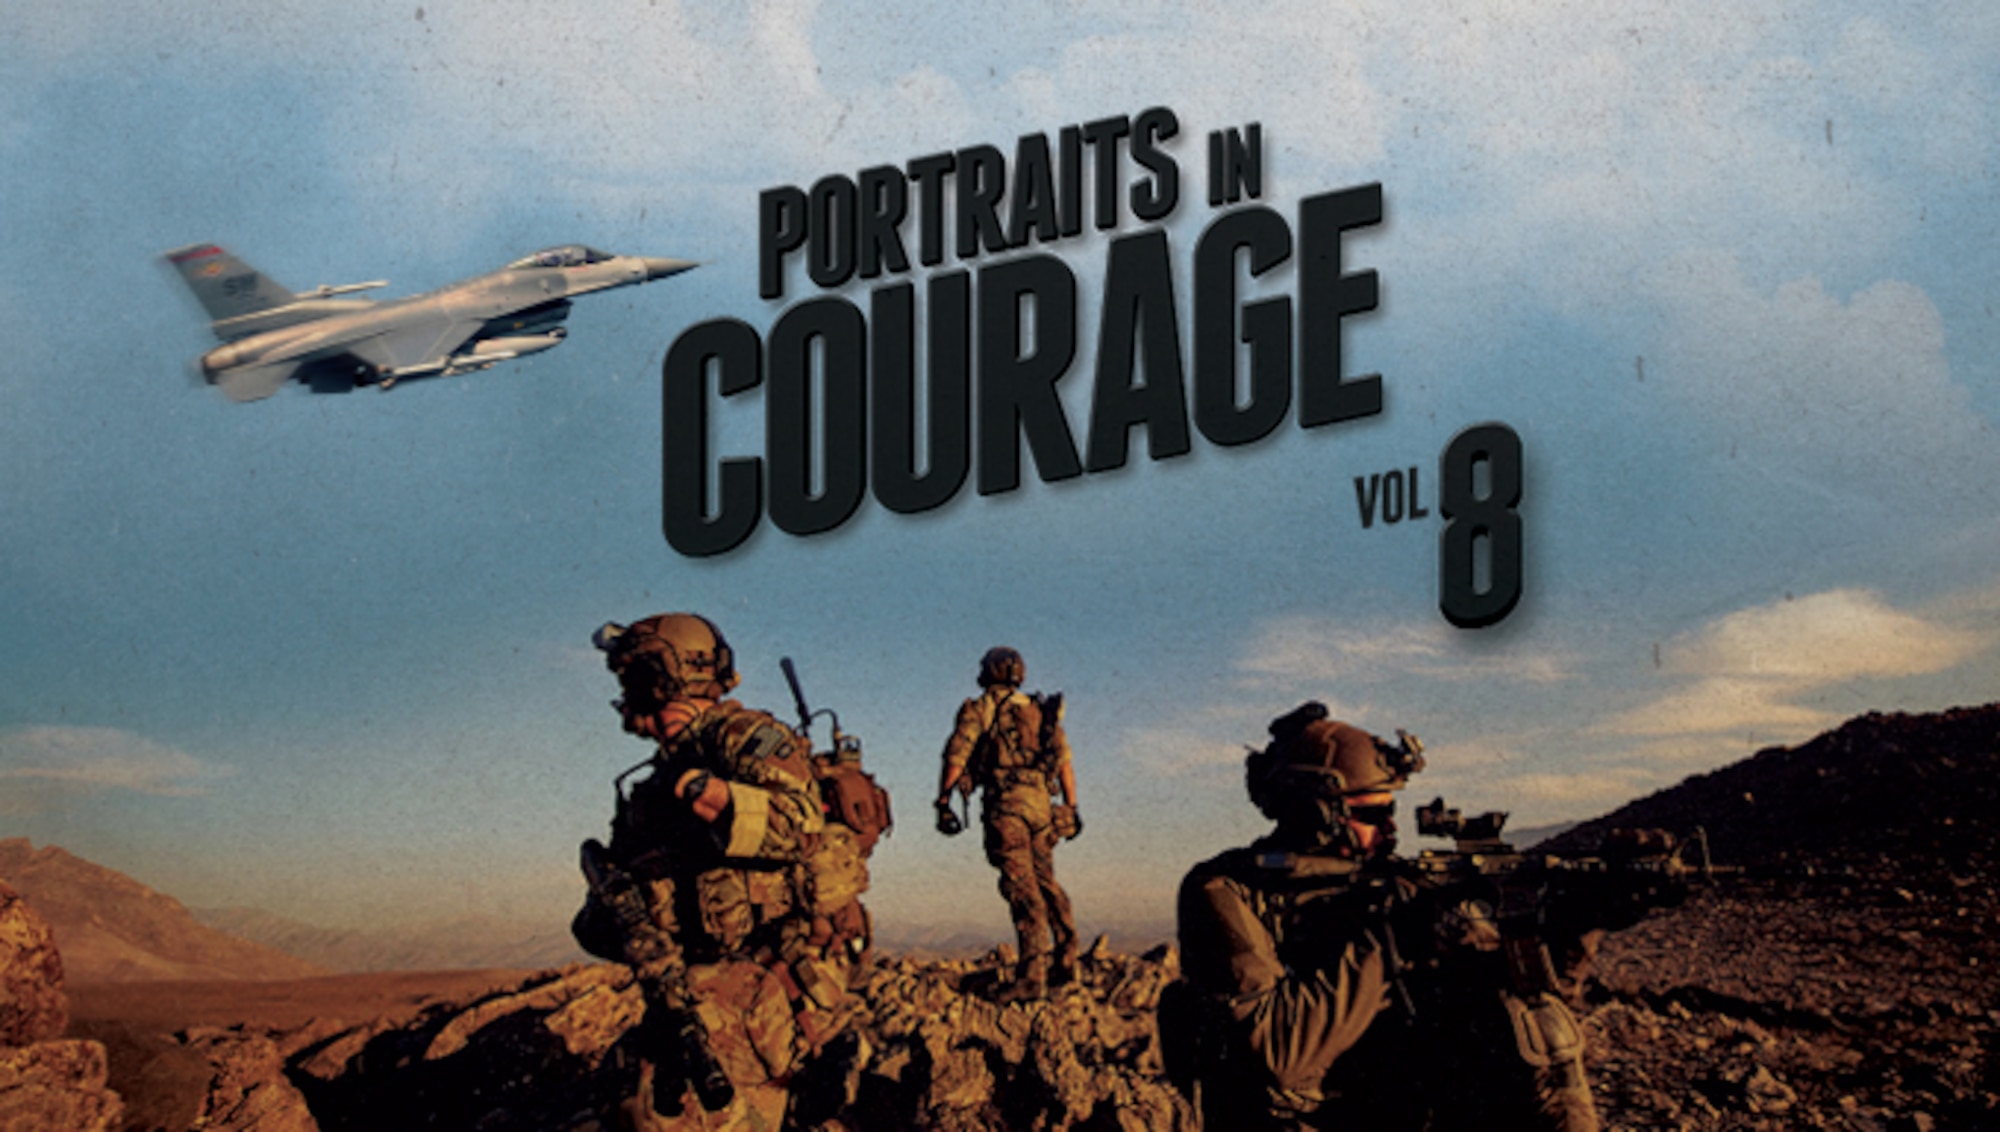 The latest Portraits in Courage, Volume VIII.